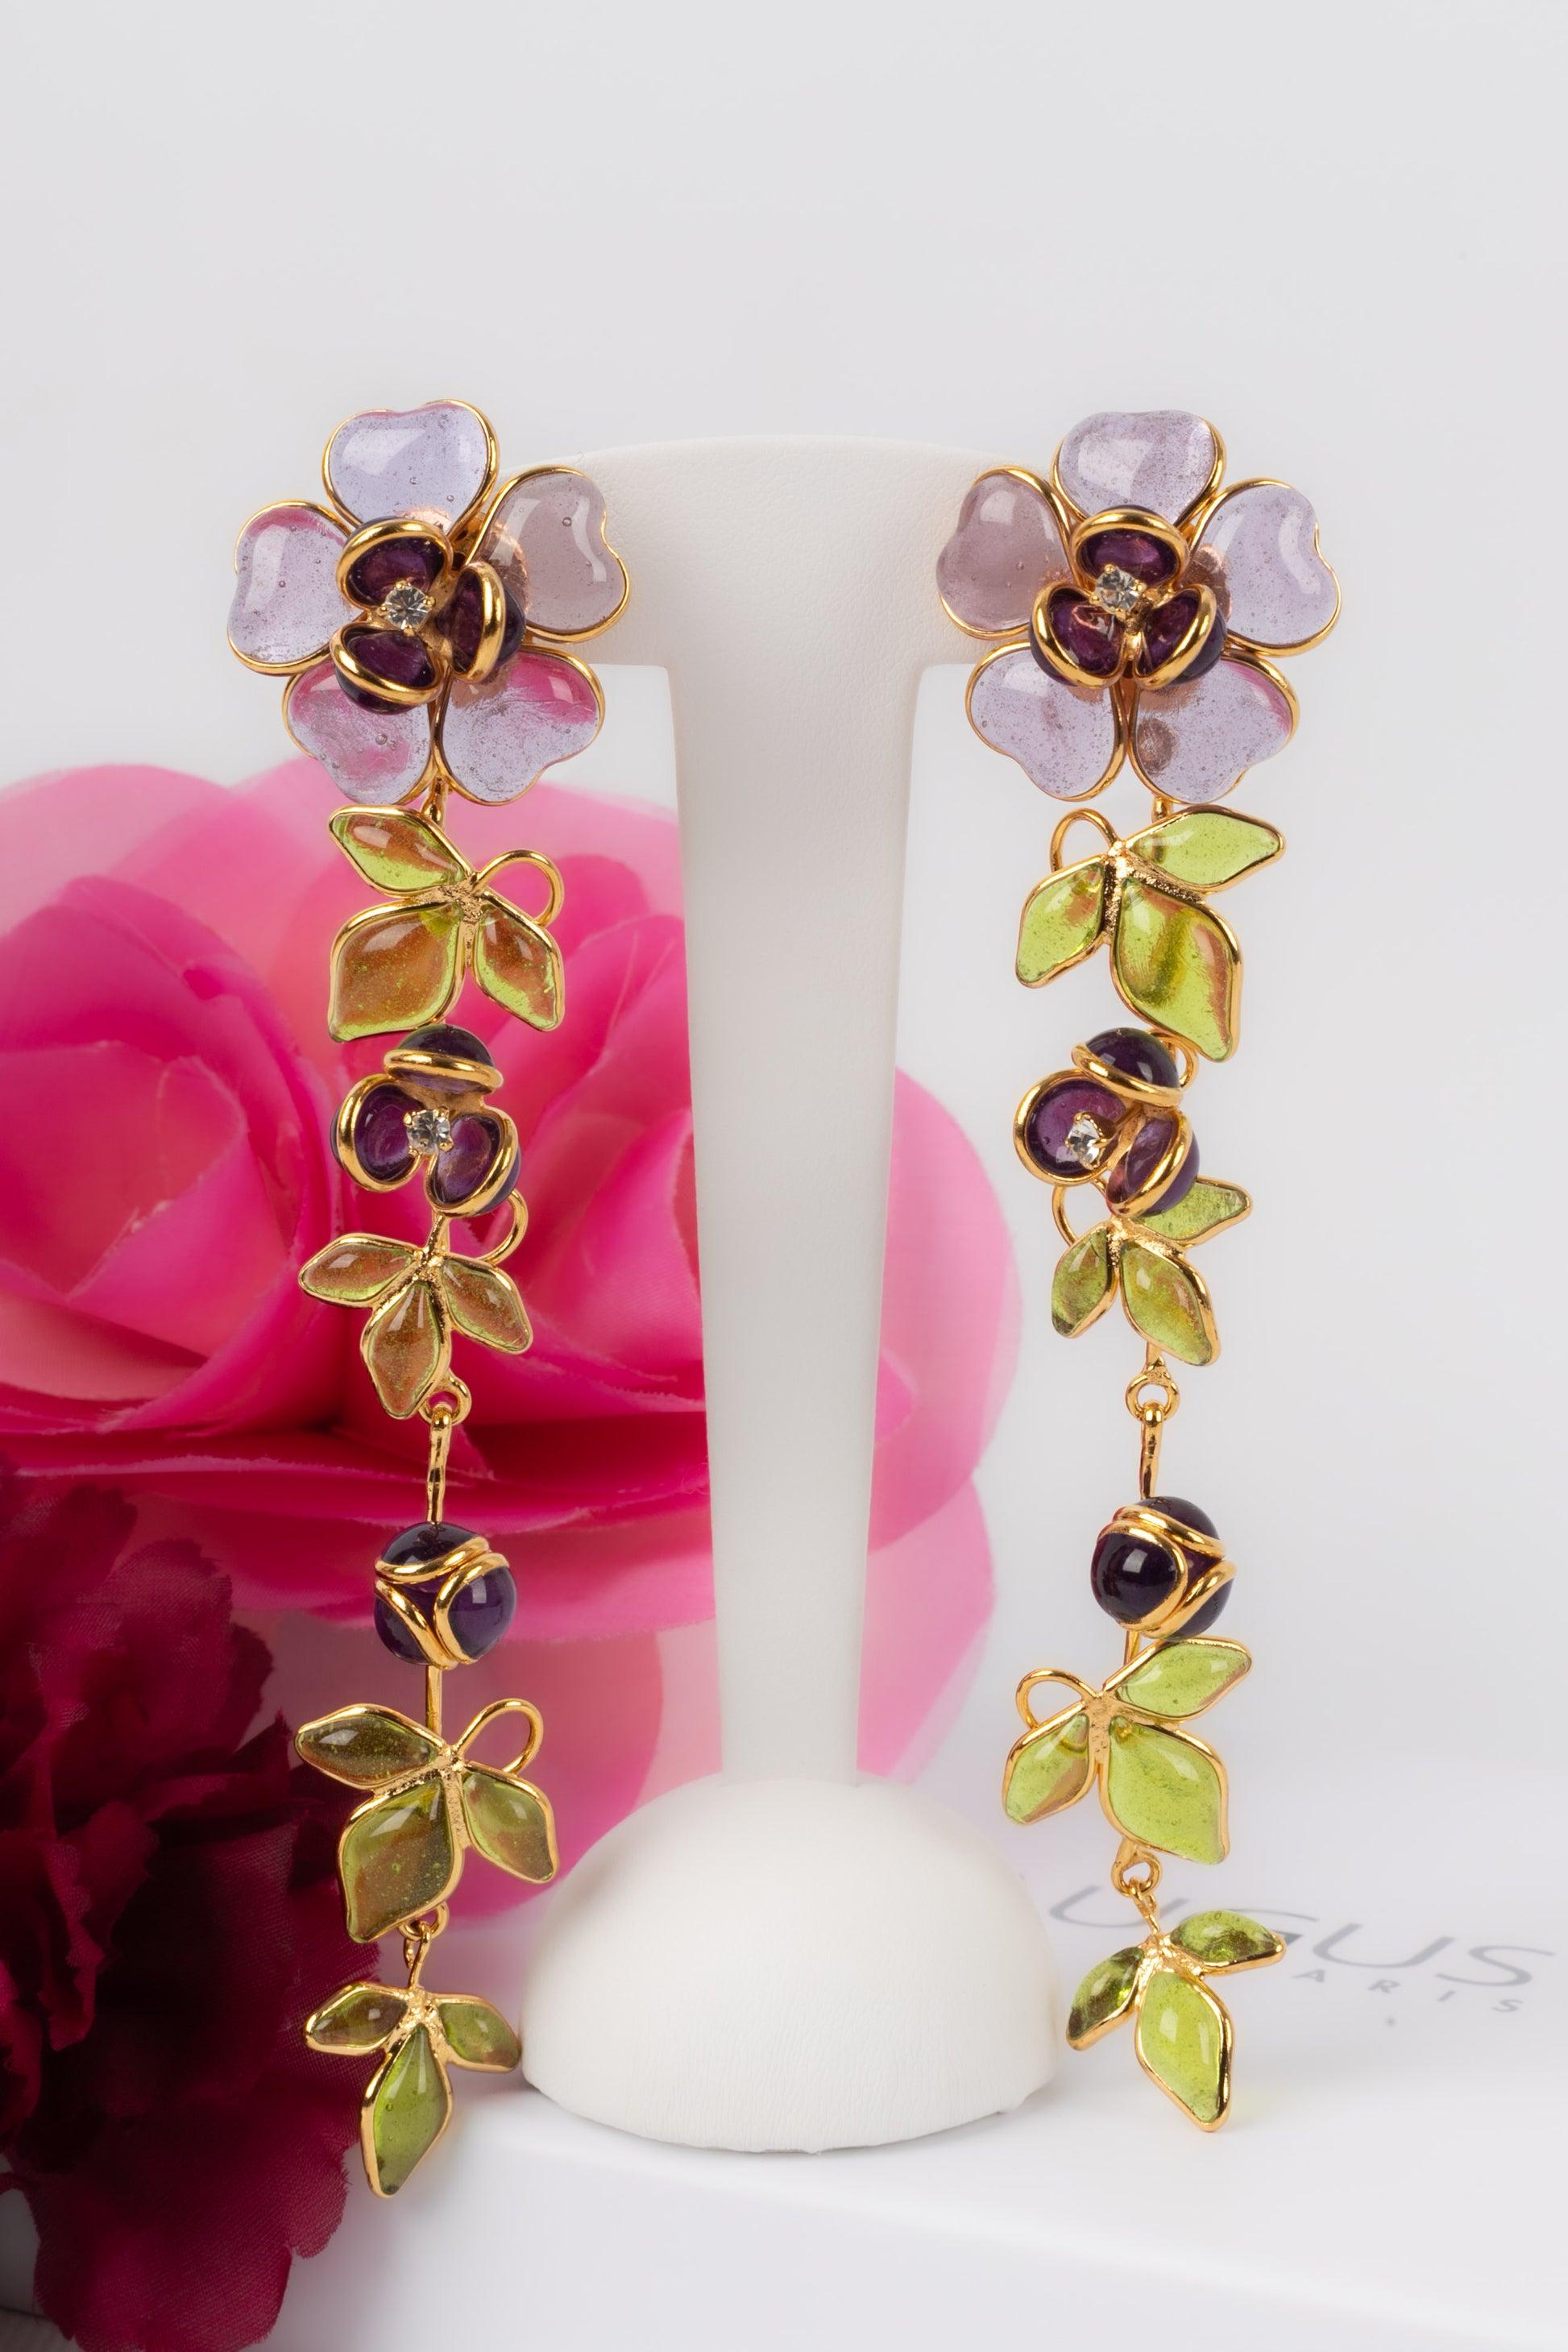 Augustine Golden Metal Earrings with Glass Paste in Purple Tones For Sale 4